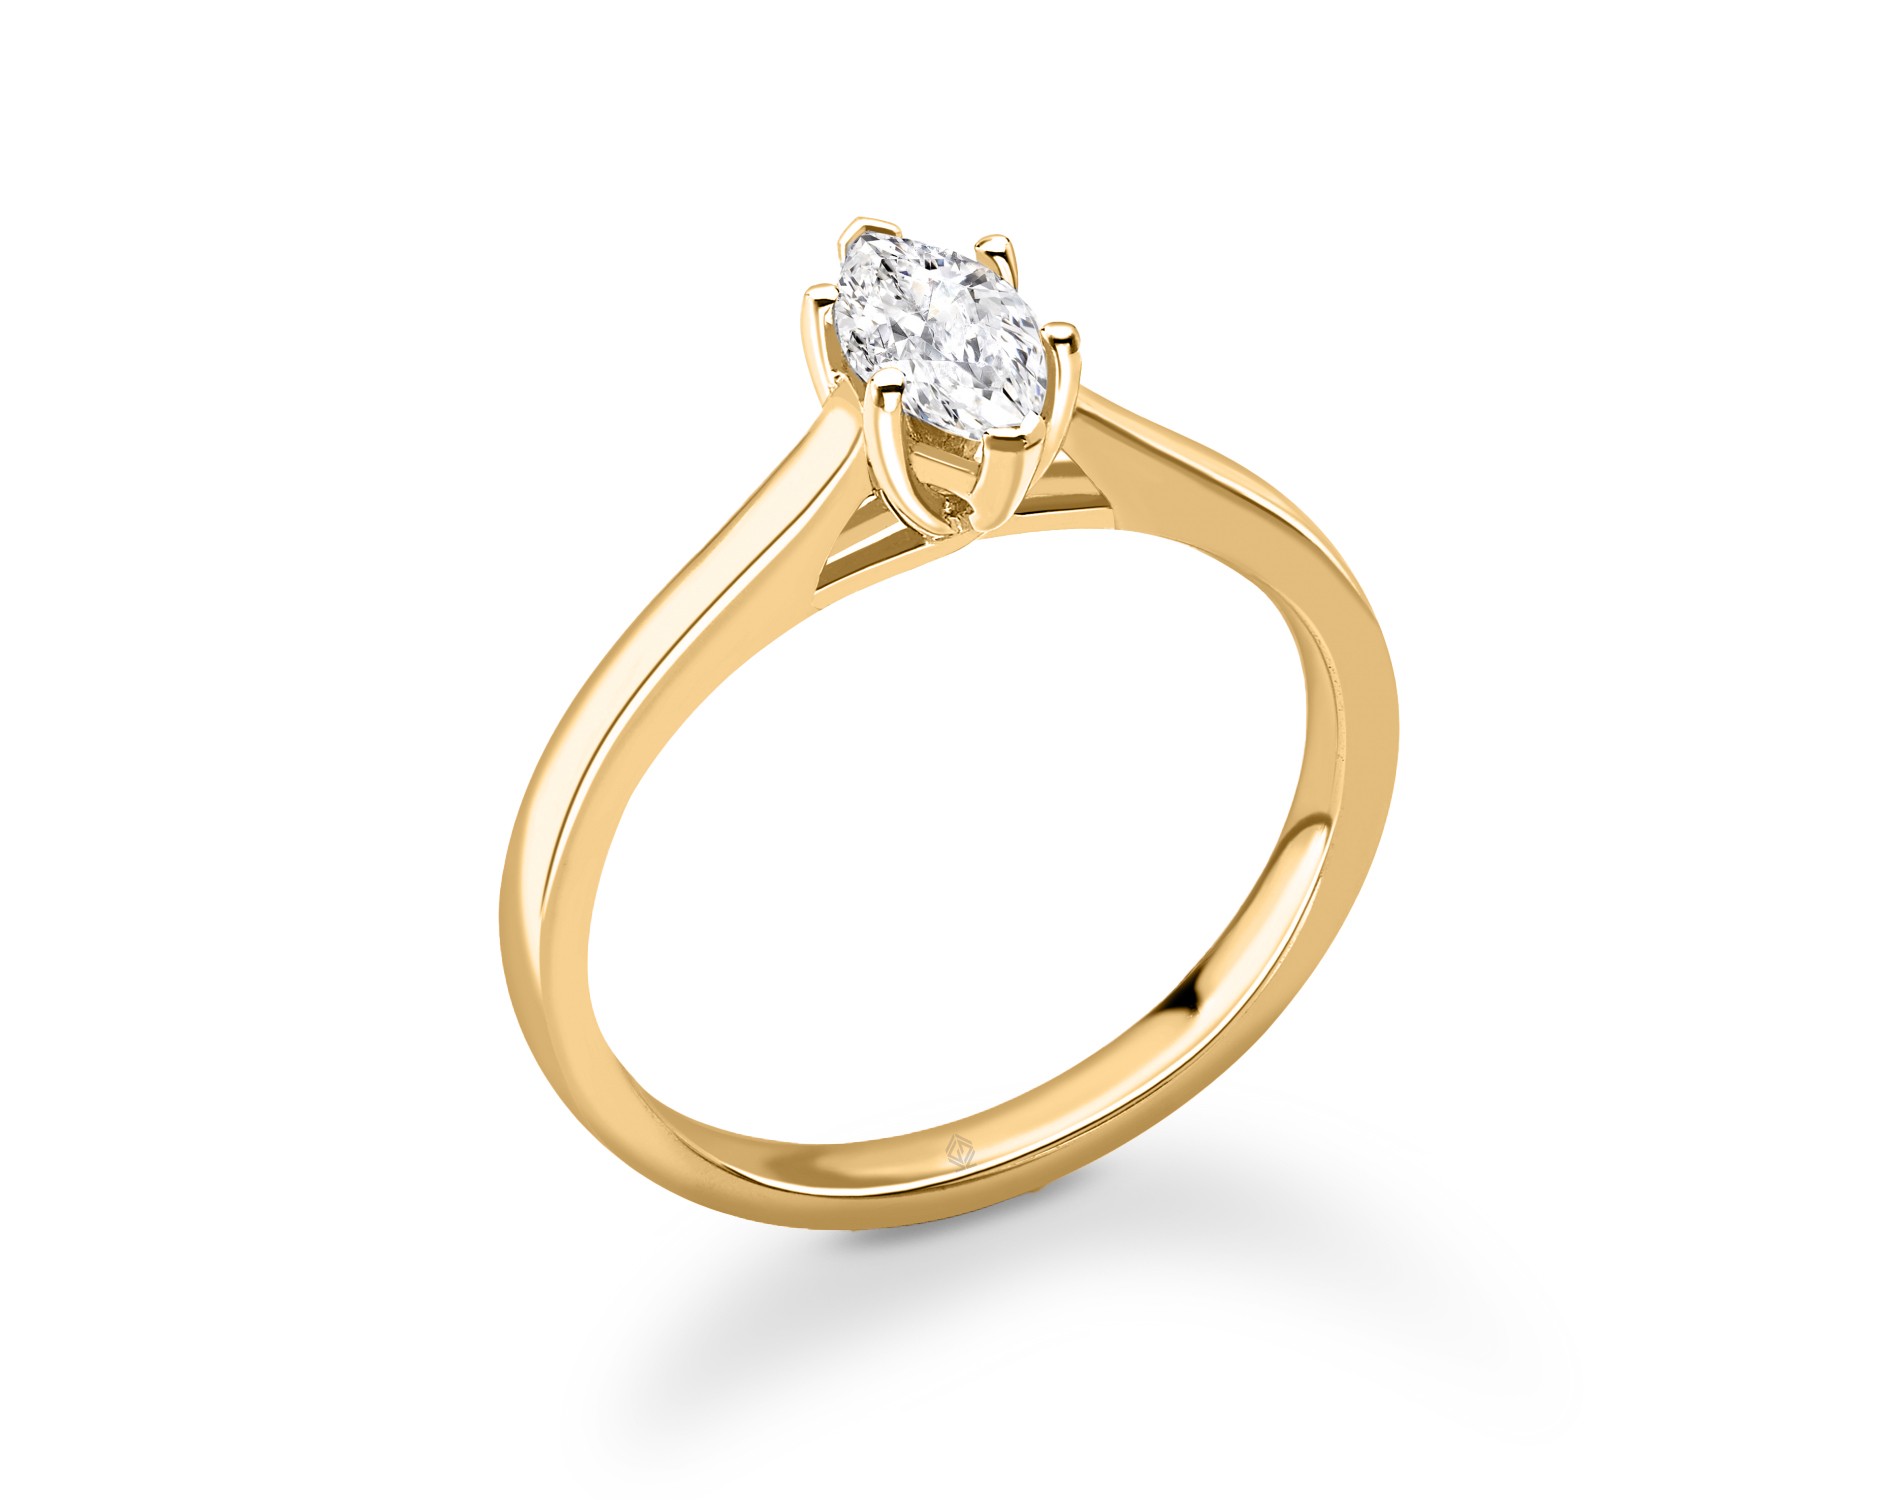 18K YELLOW GOLD MARQUISE CUT SOLITAIRE DIAMOND ENGAGEMENT RING